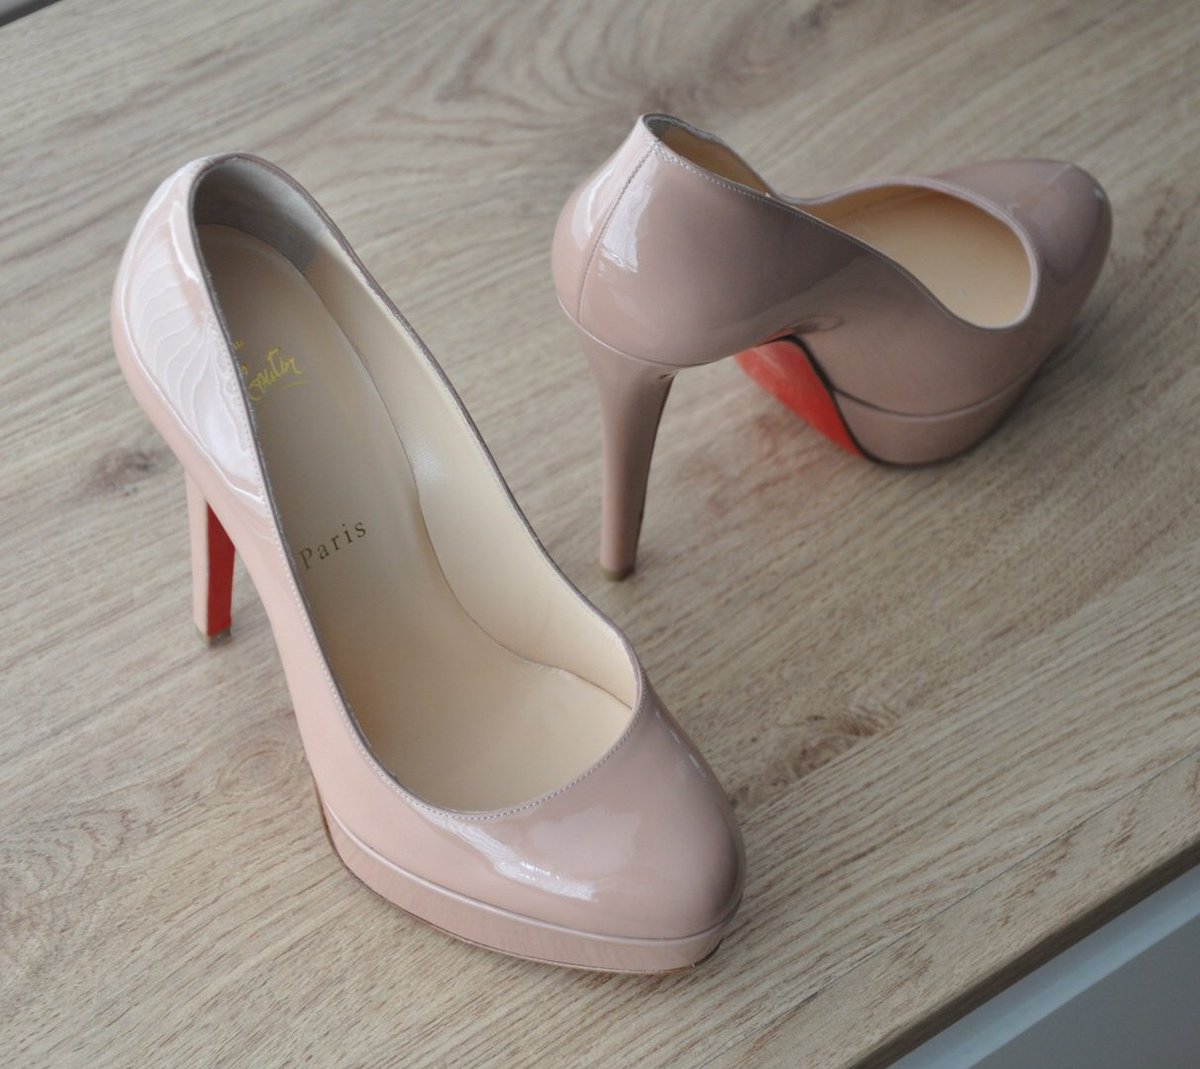 I've not had these beauties out for a while my 130mm Nude Biancas #highheels